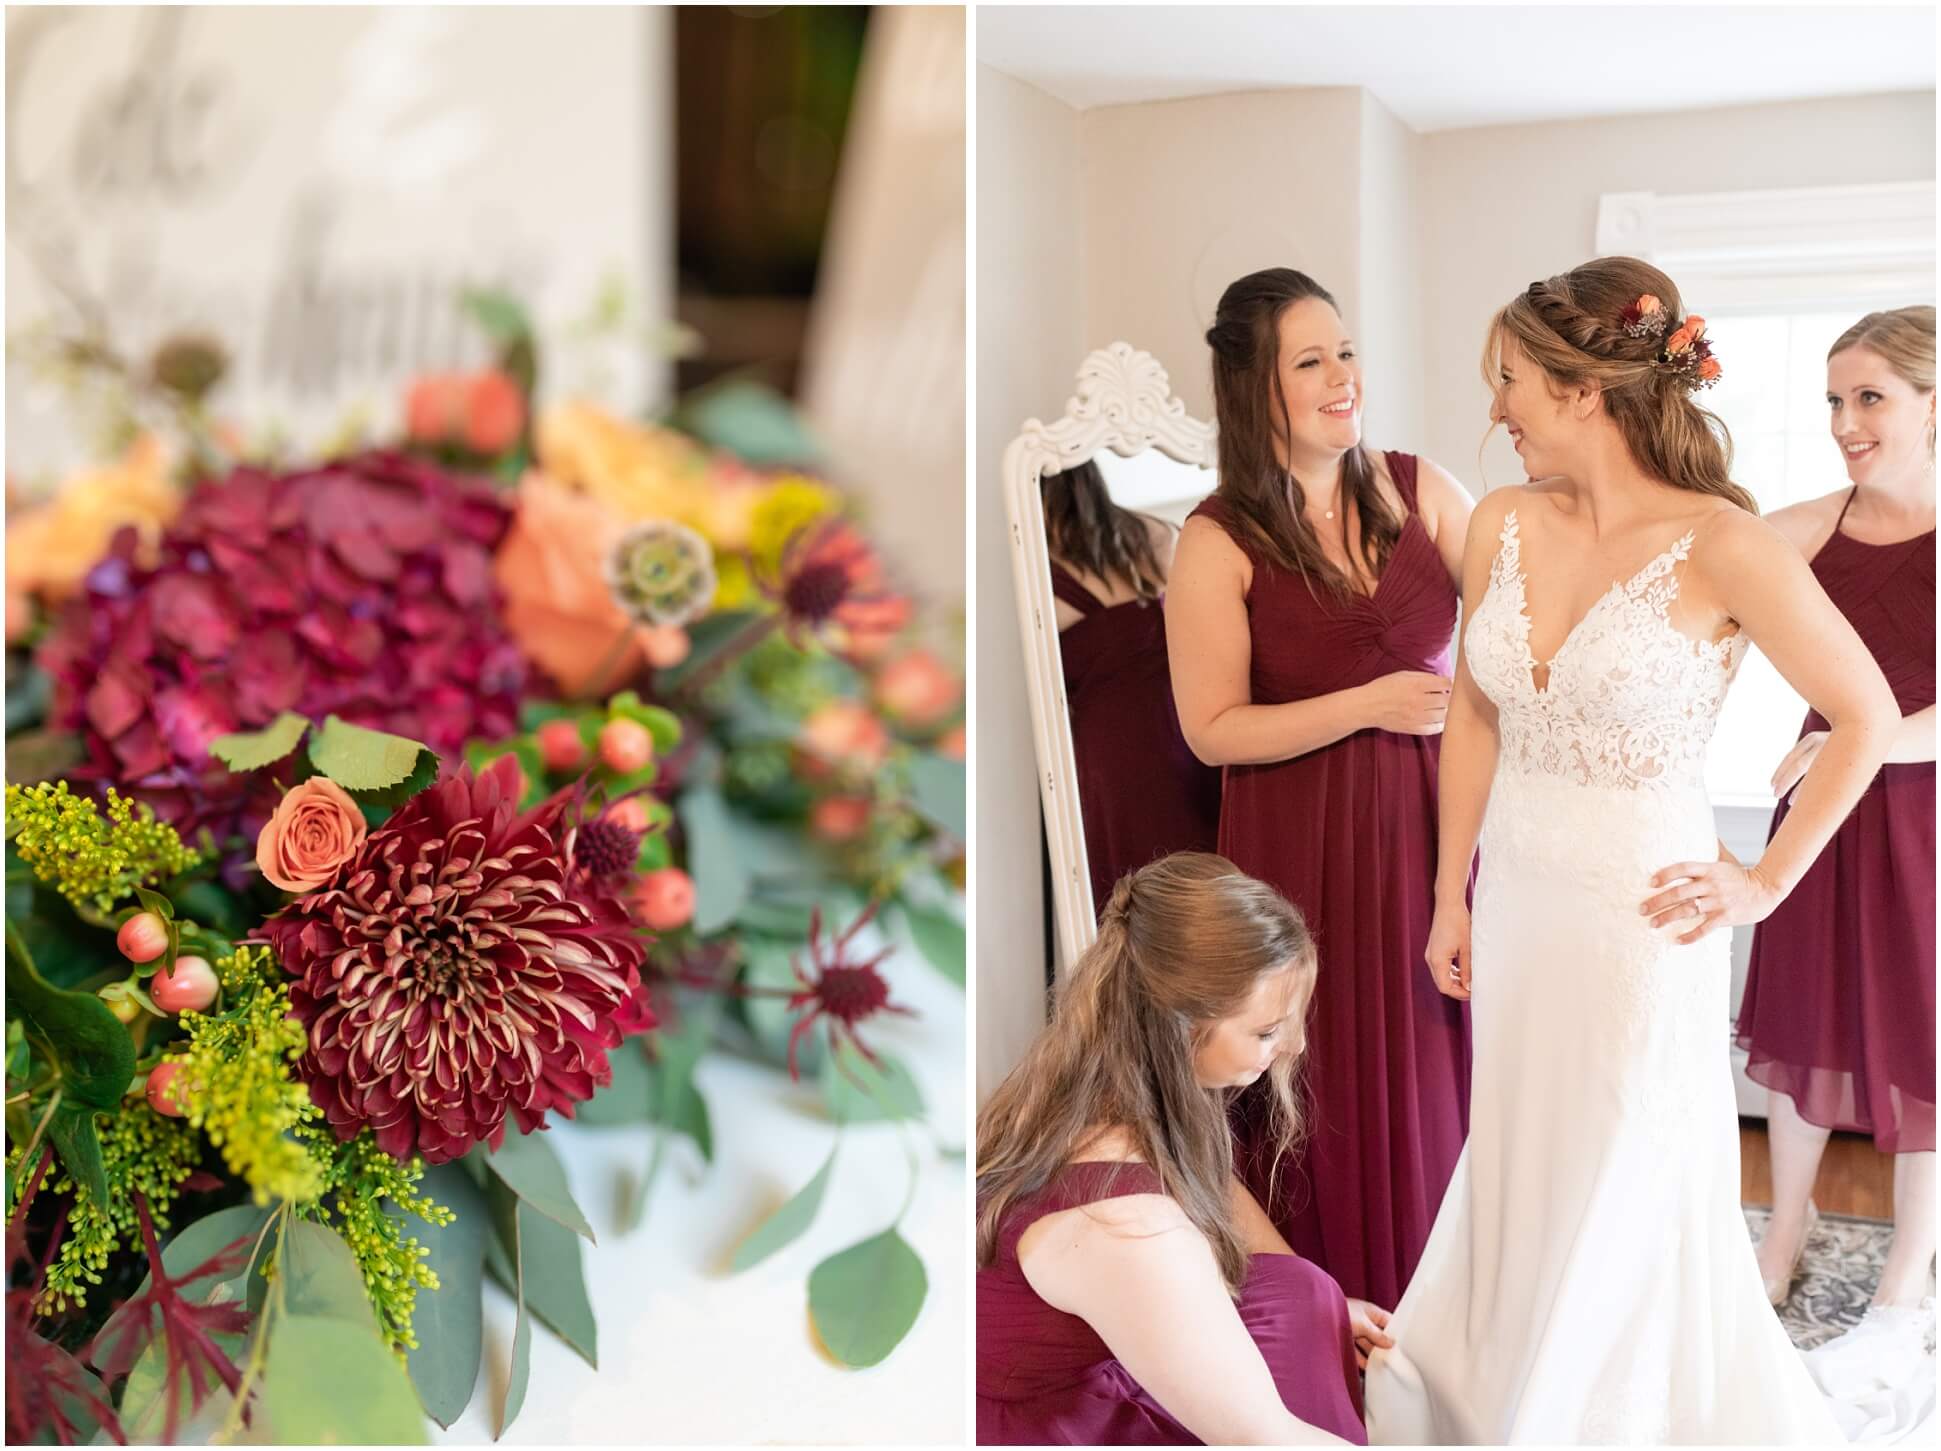 BOUQUET AND BRIDESMAIDS HELPING BRIDE INTO HER DRESS